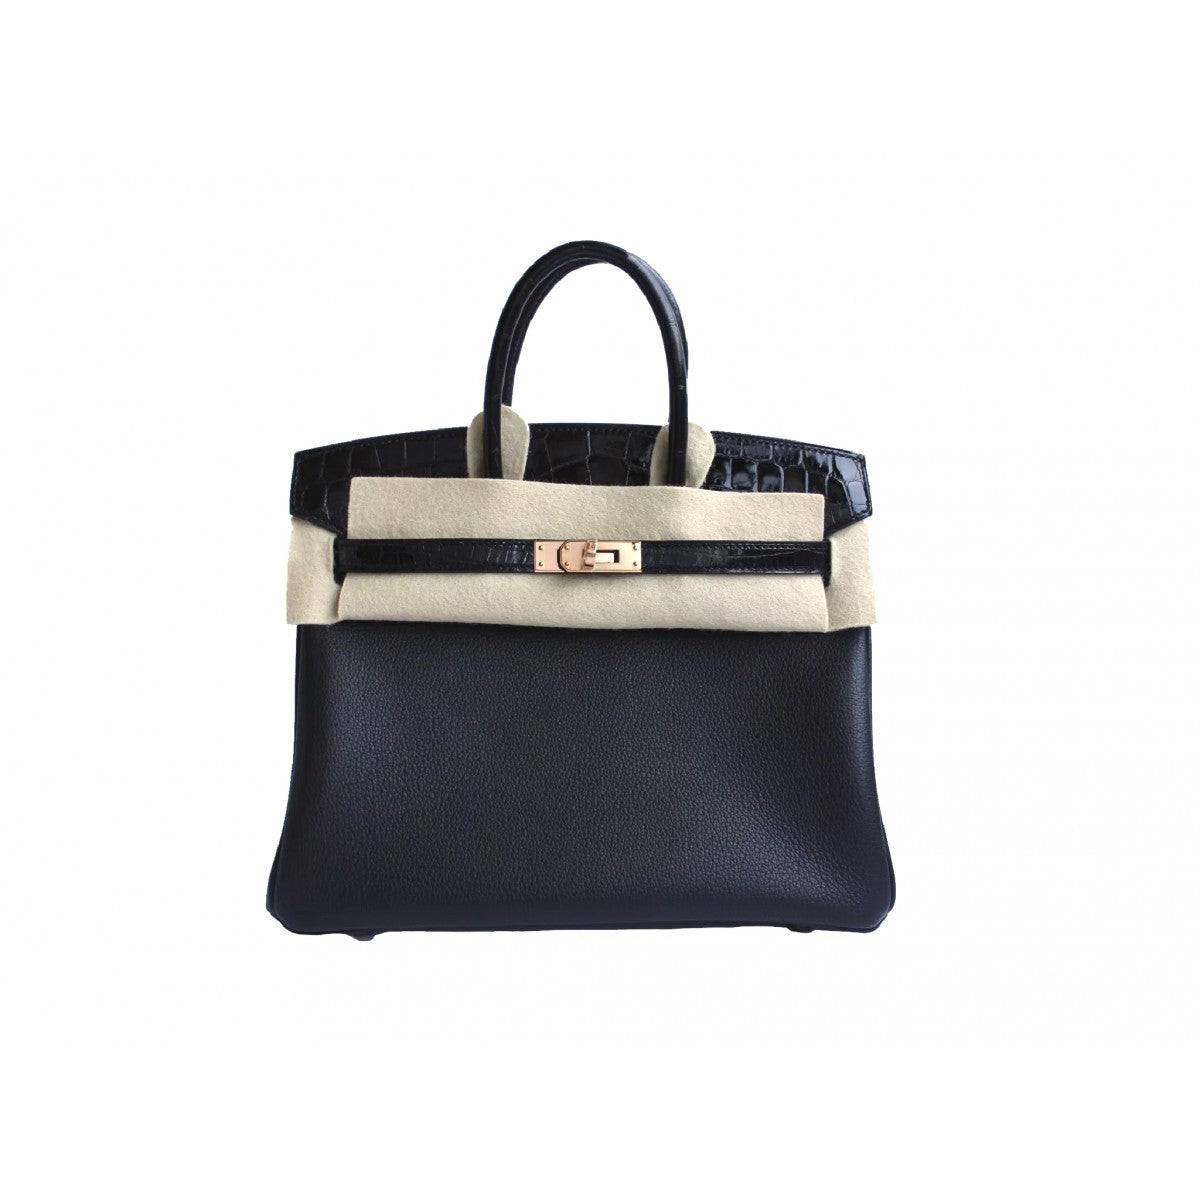 hermes touch bag